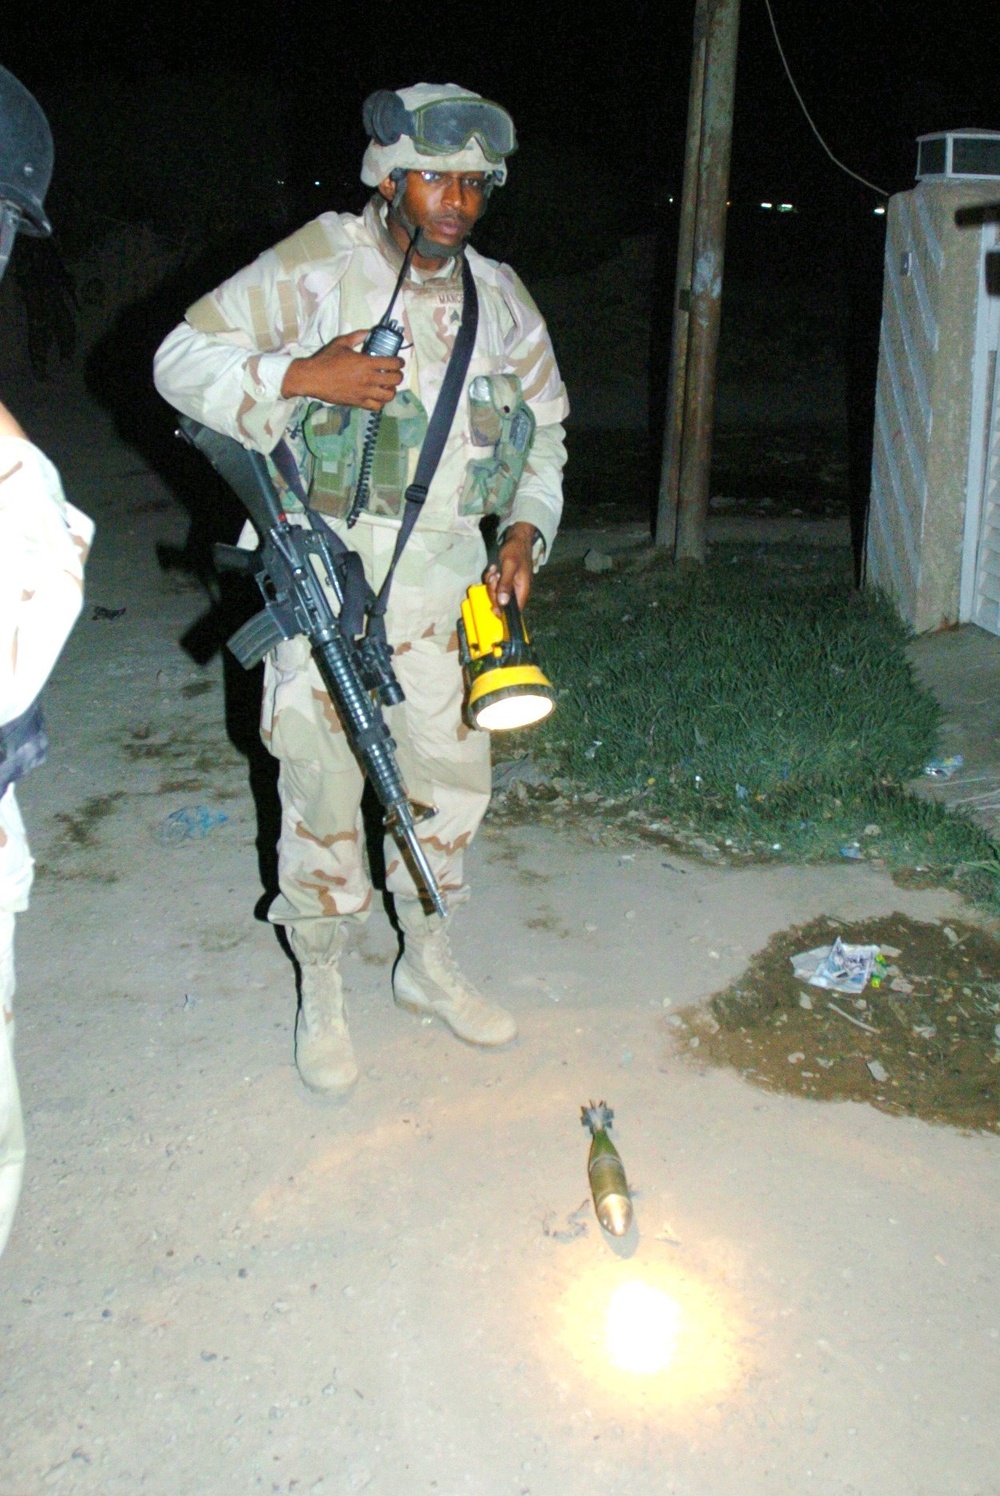 Sgt. Shaun Mance inspects a mortar round found in a Zafarania residence dur